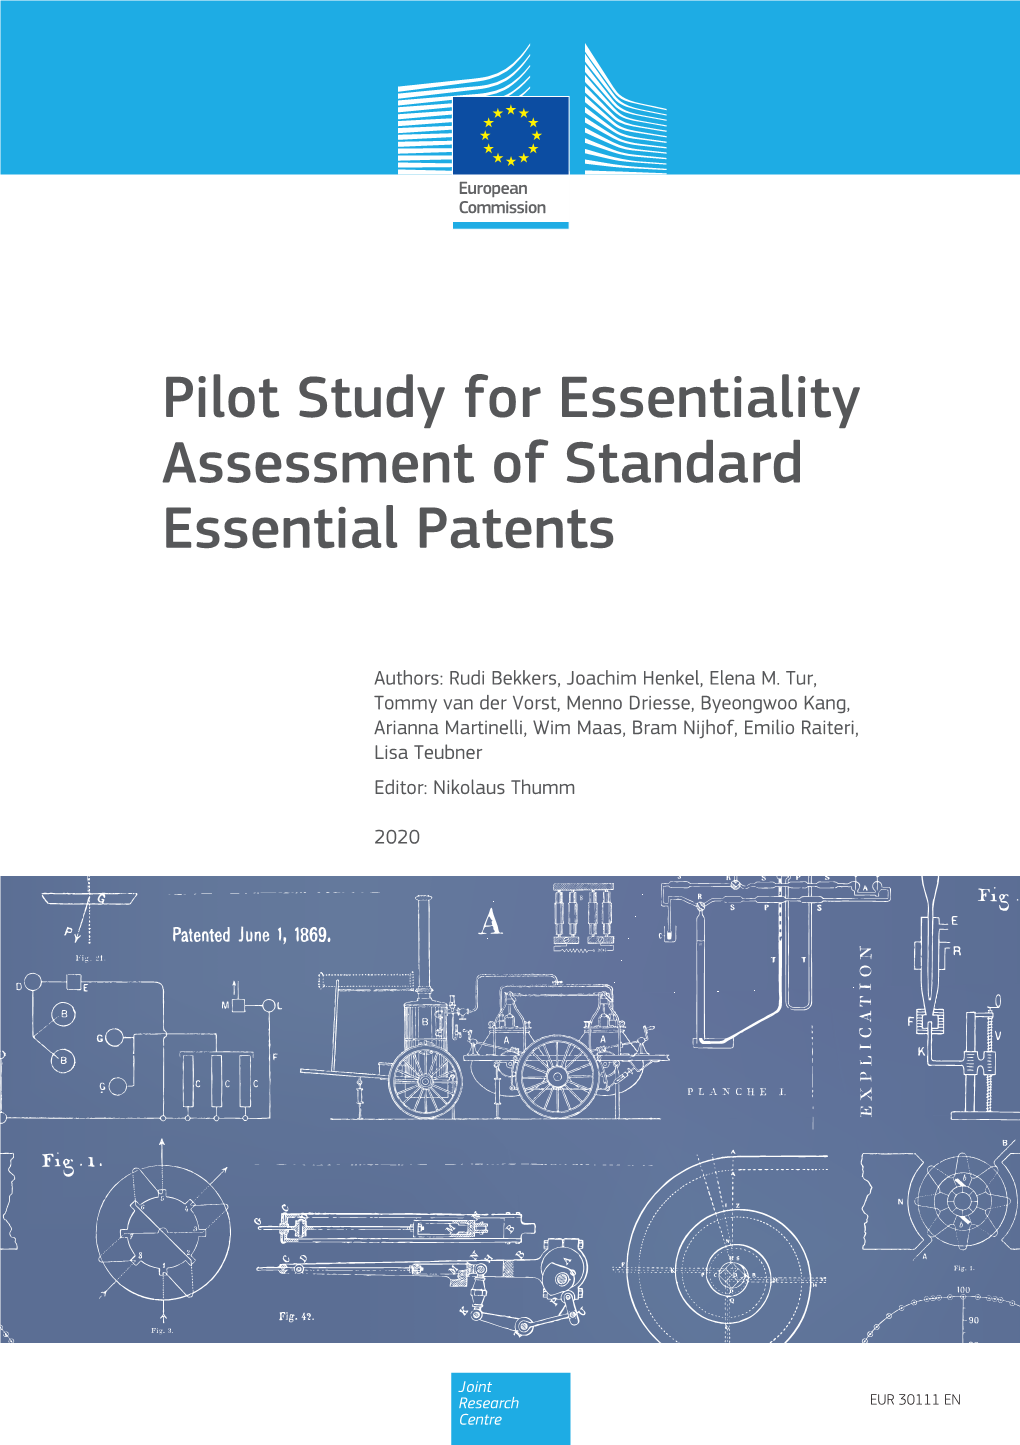 Pilot Study for Essentiality Assessment of Standard Essential Patents